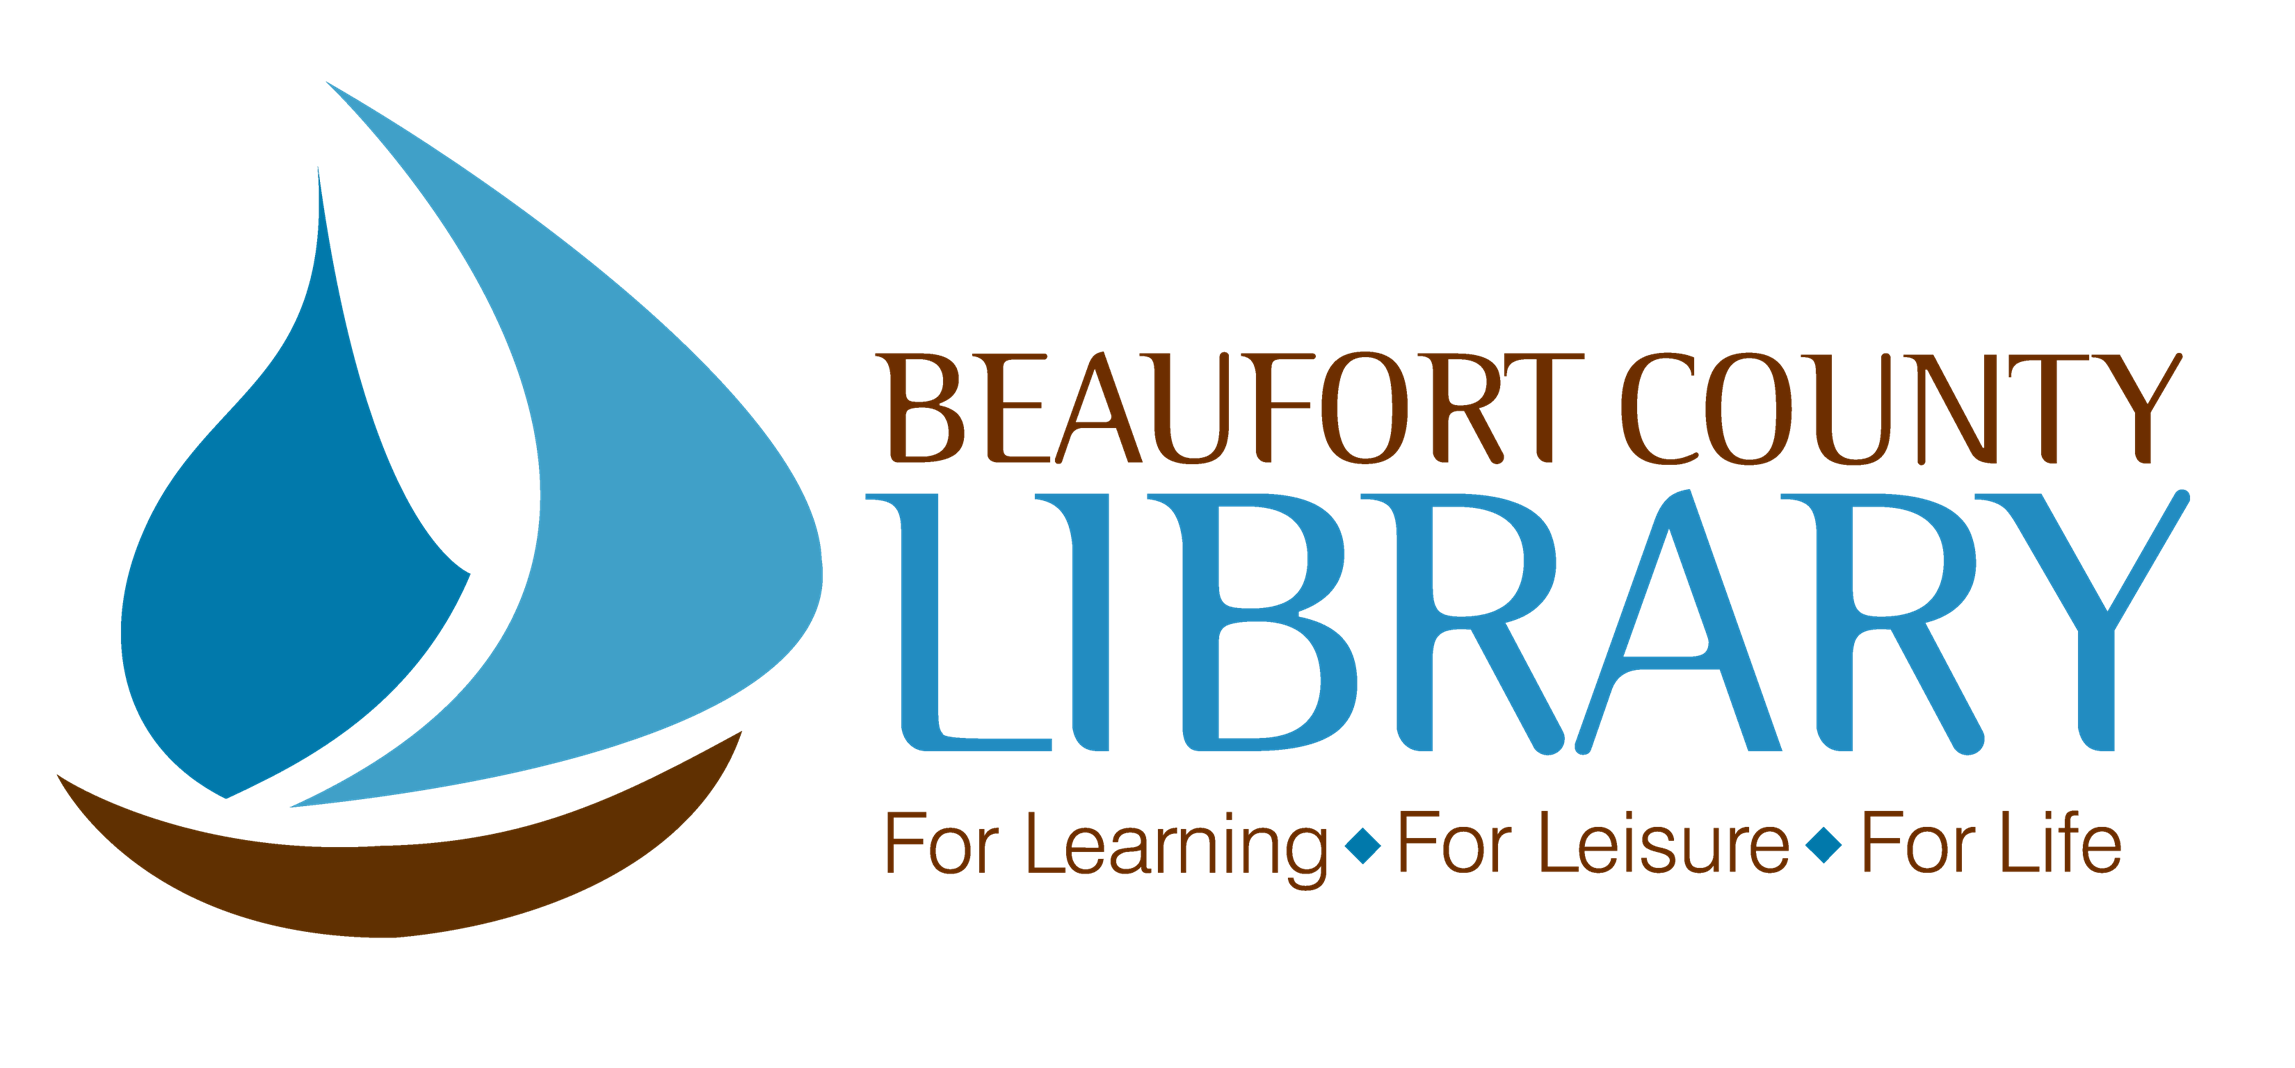 Beaufort County Library System Closed  Wednesday, April 17 for Staff Development Day